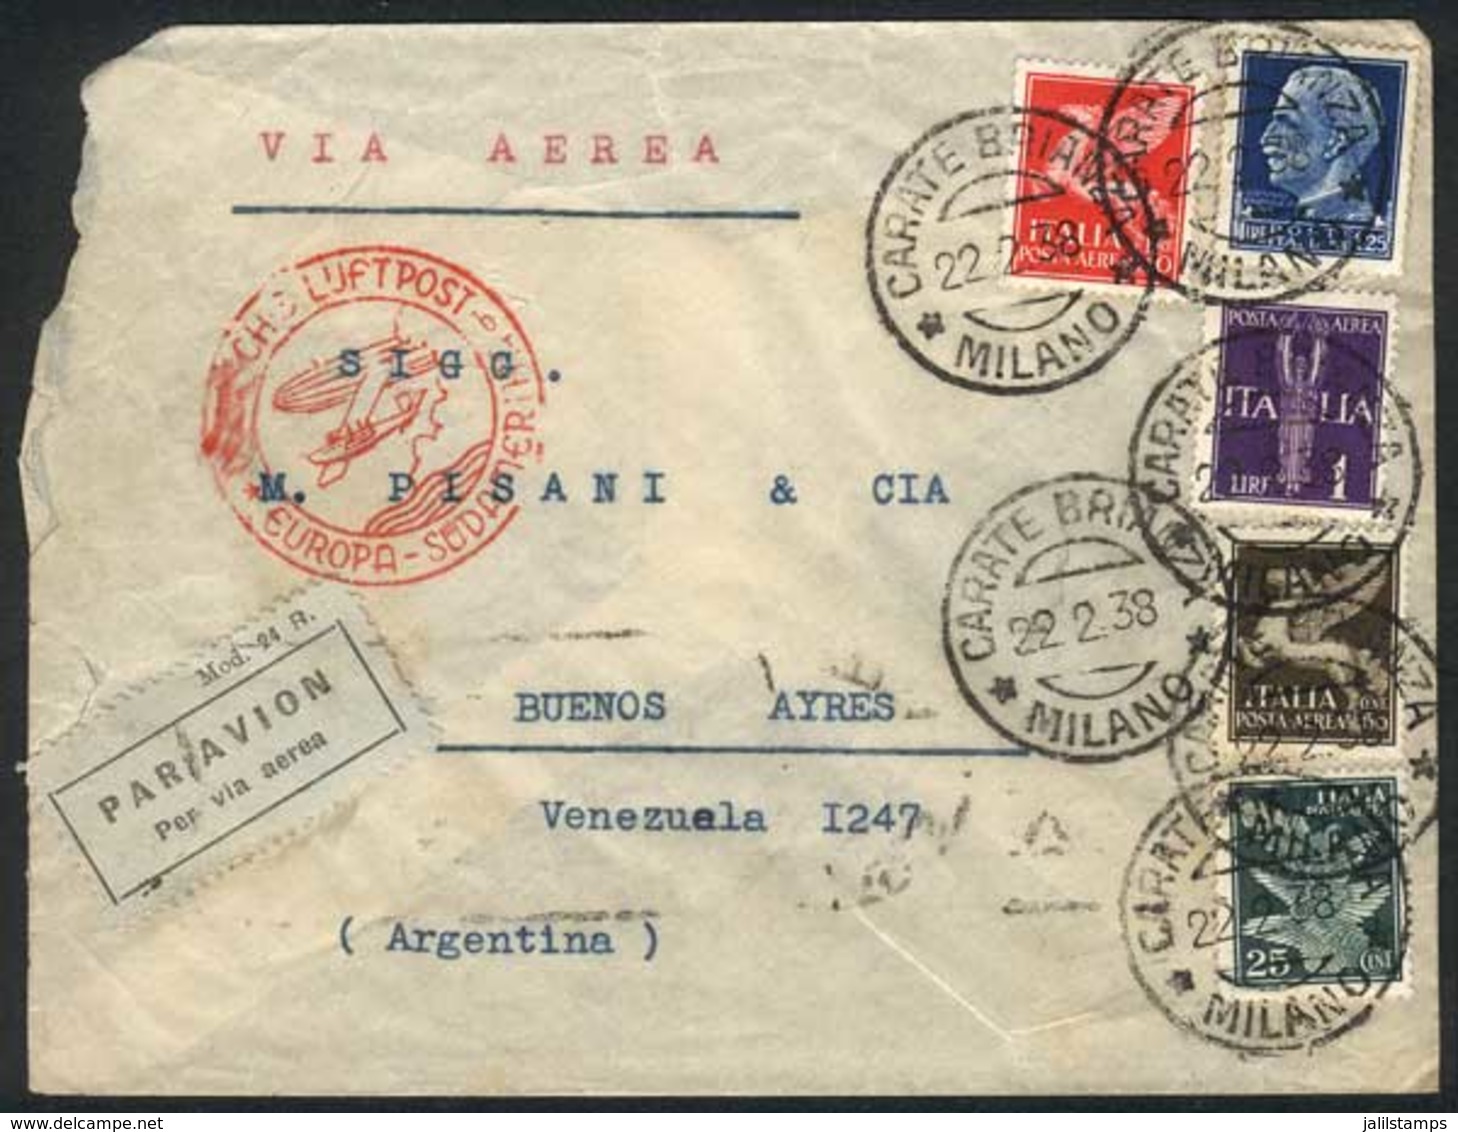 ITALY: Airmail Cover Sent From Carate Brianza To Buenos Aires On 22/FE/1938, Franked With Interesting 13 Lire Postage, V - Unclassified